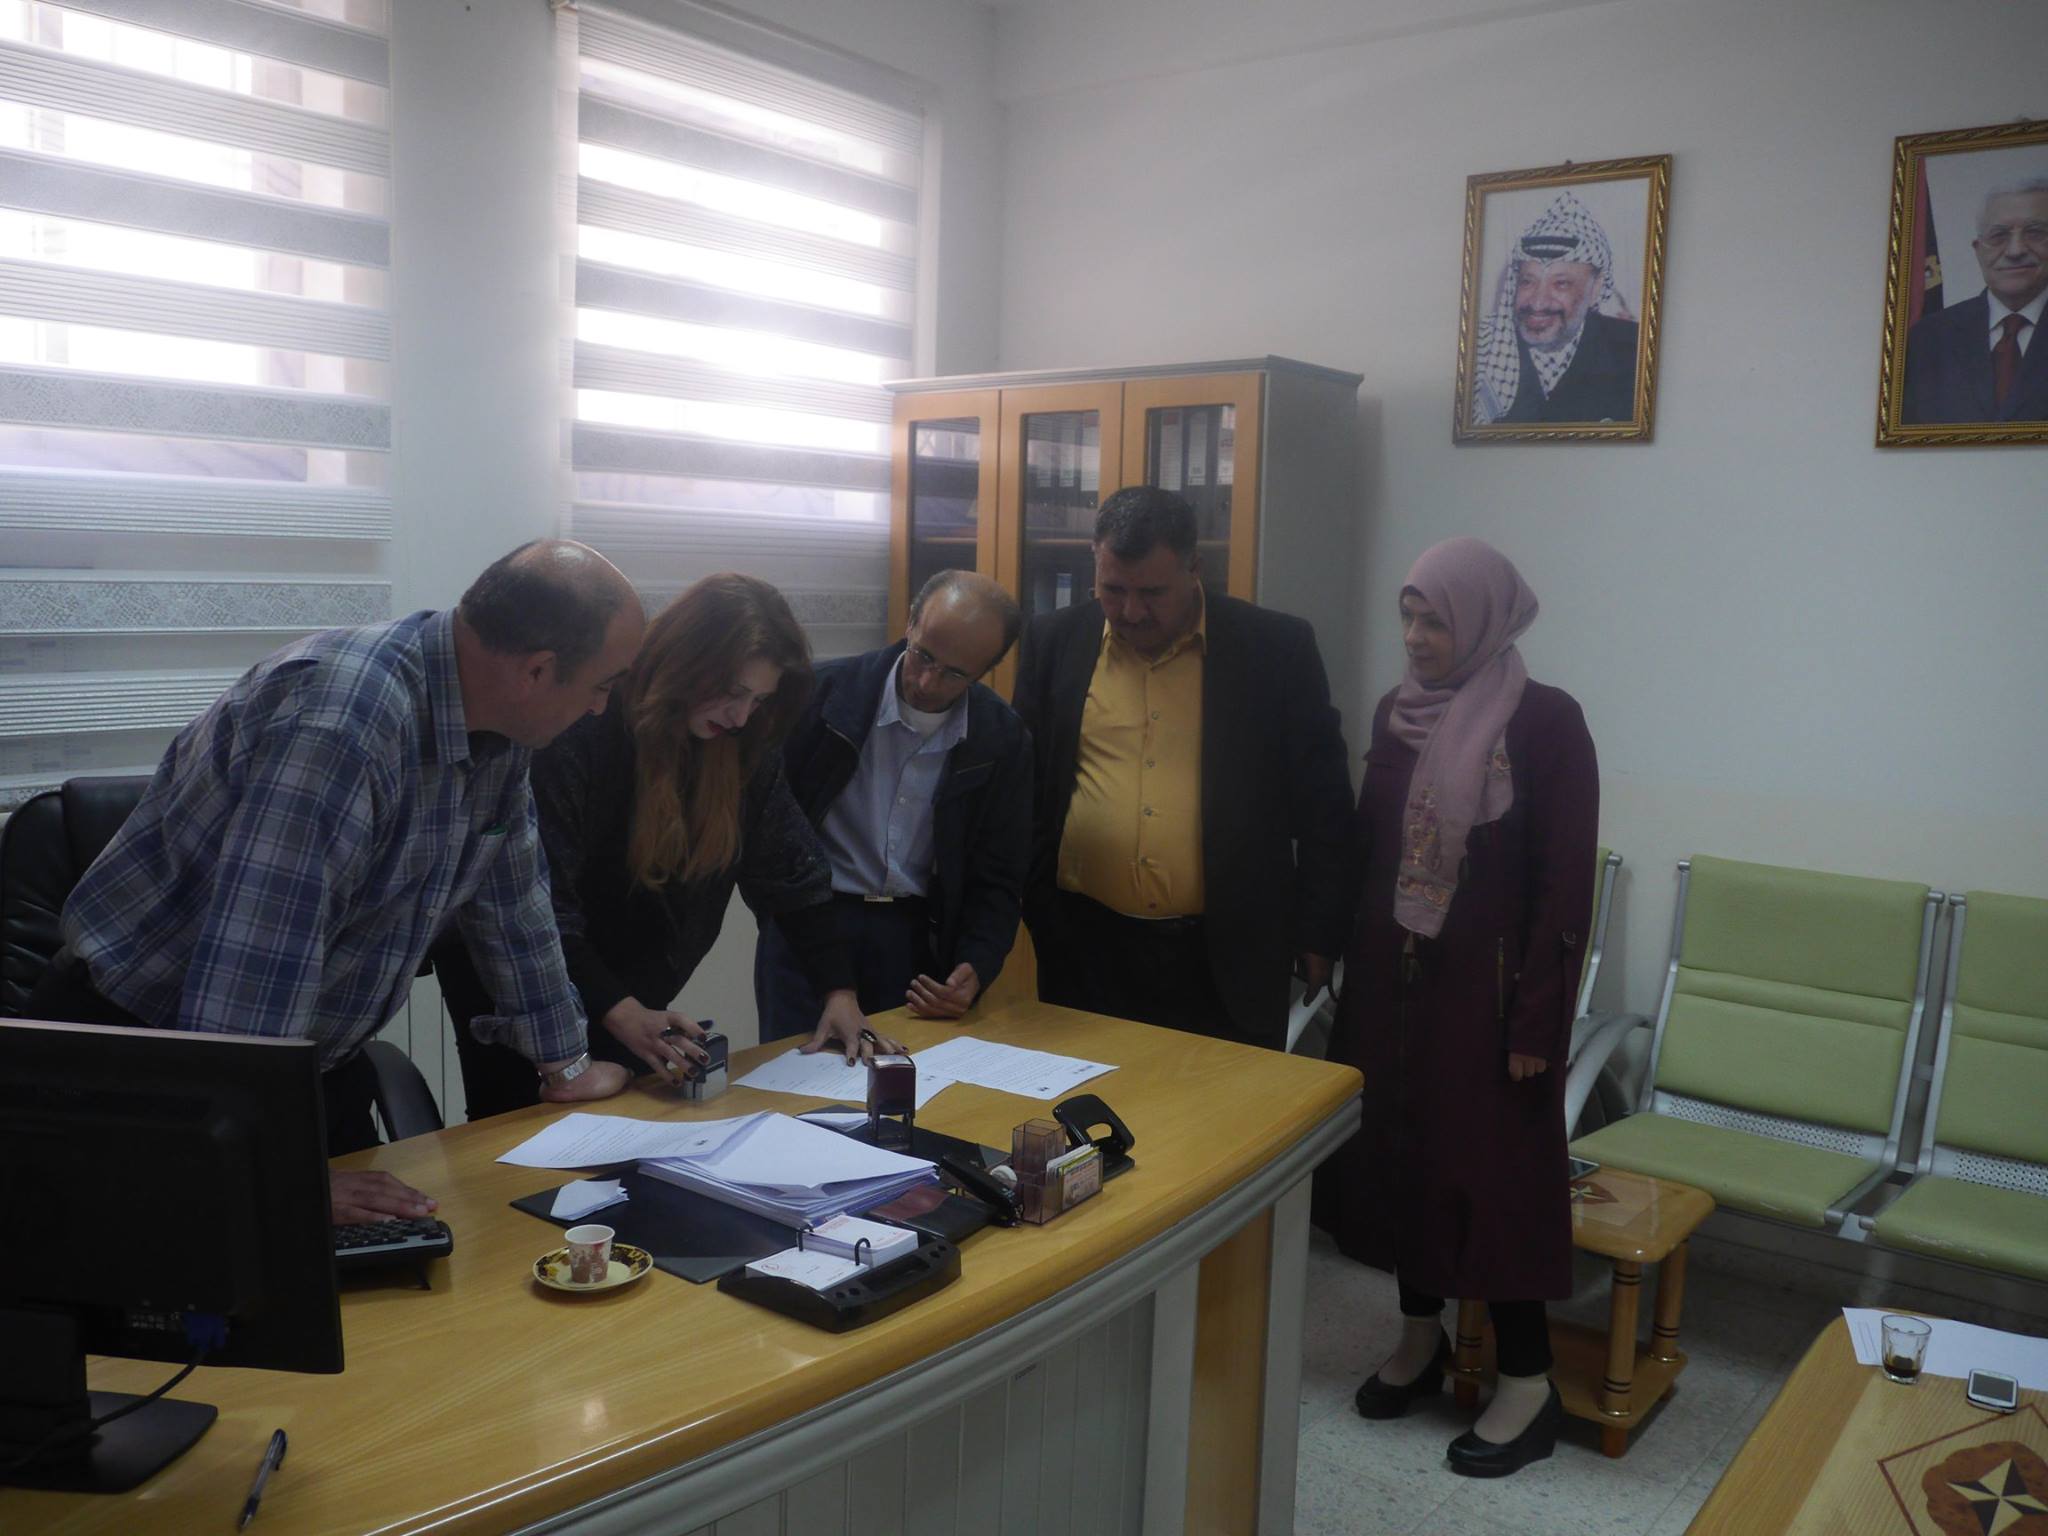  ADWAR and the technical educational and vocational training center in Halhul signed a memorandum of understanding to implement the special vocational program within the TVET programs that is related to CNC computer Numeric Control skills.